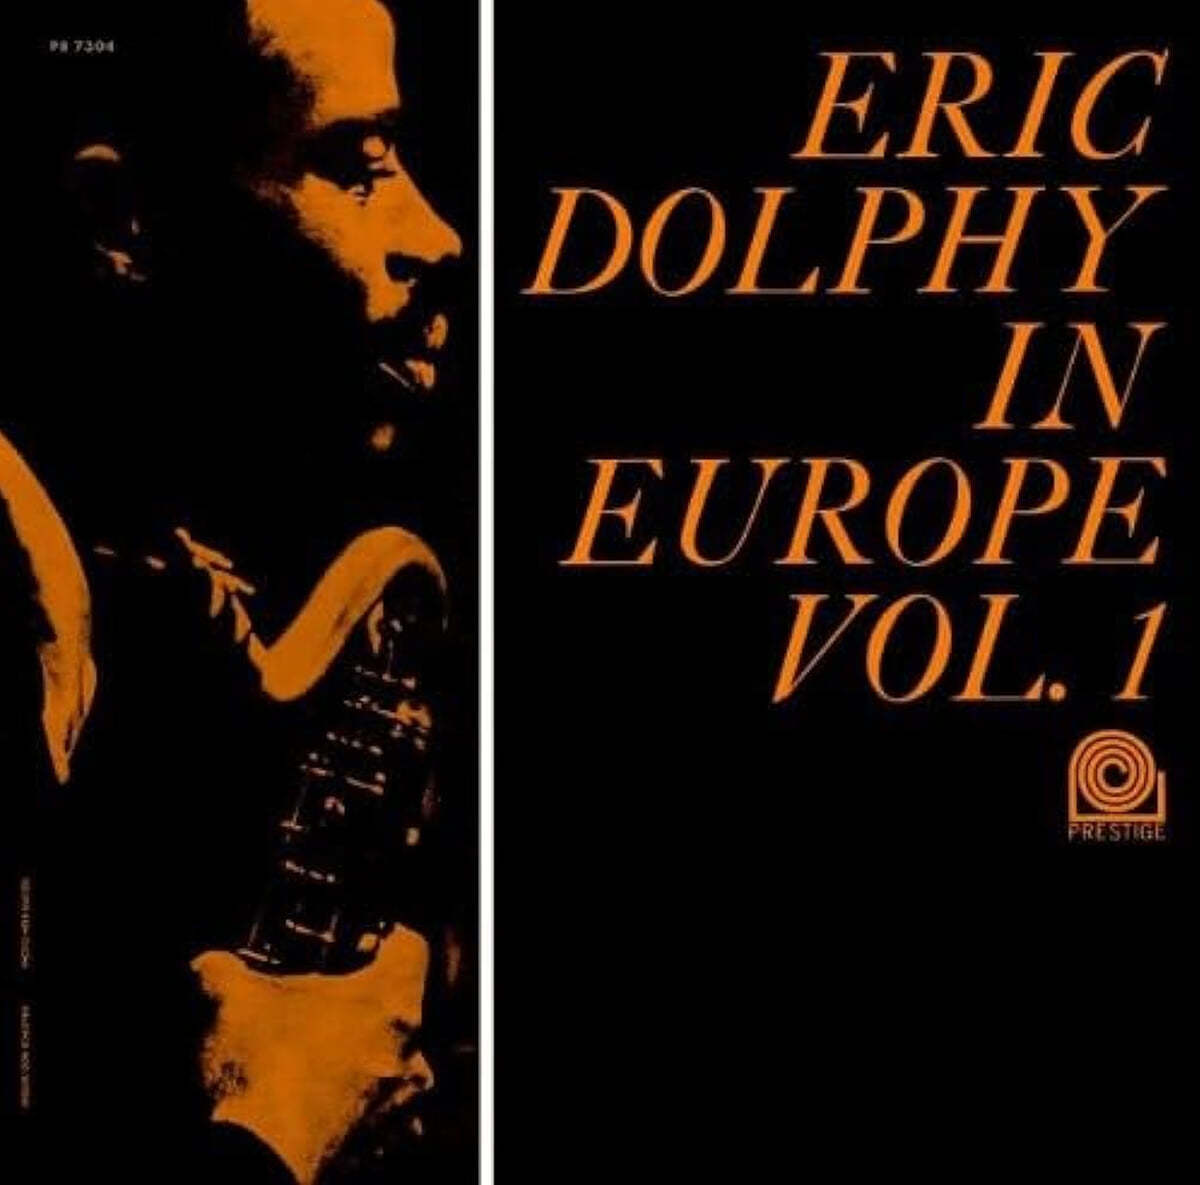 Eric Dolphy (에릭 돌피) - In Europe. Vol. 1